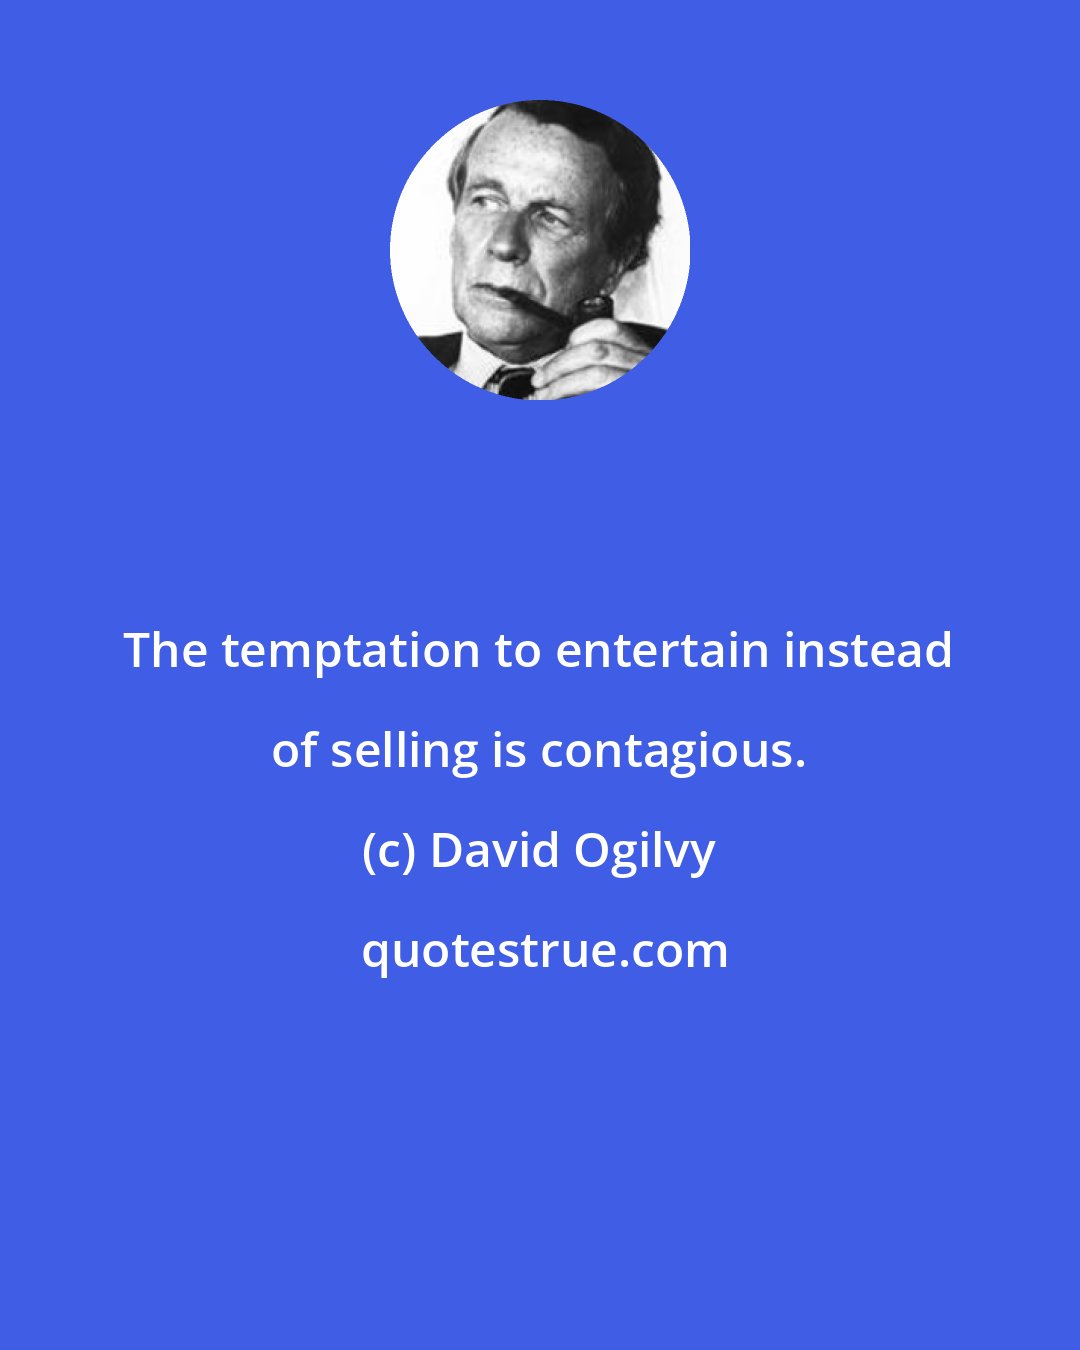 David Ogilvy: The temptation to entertain instead of selling is contagious.